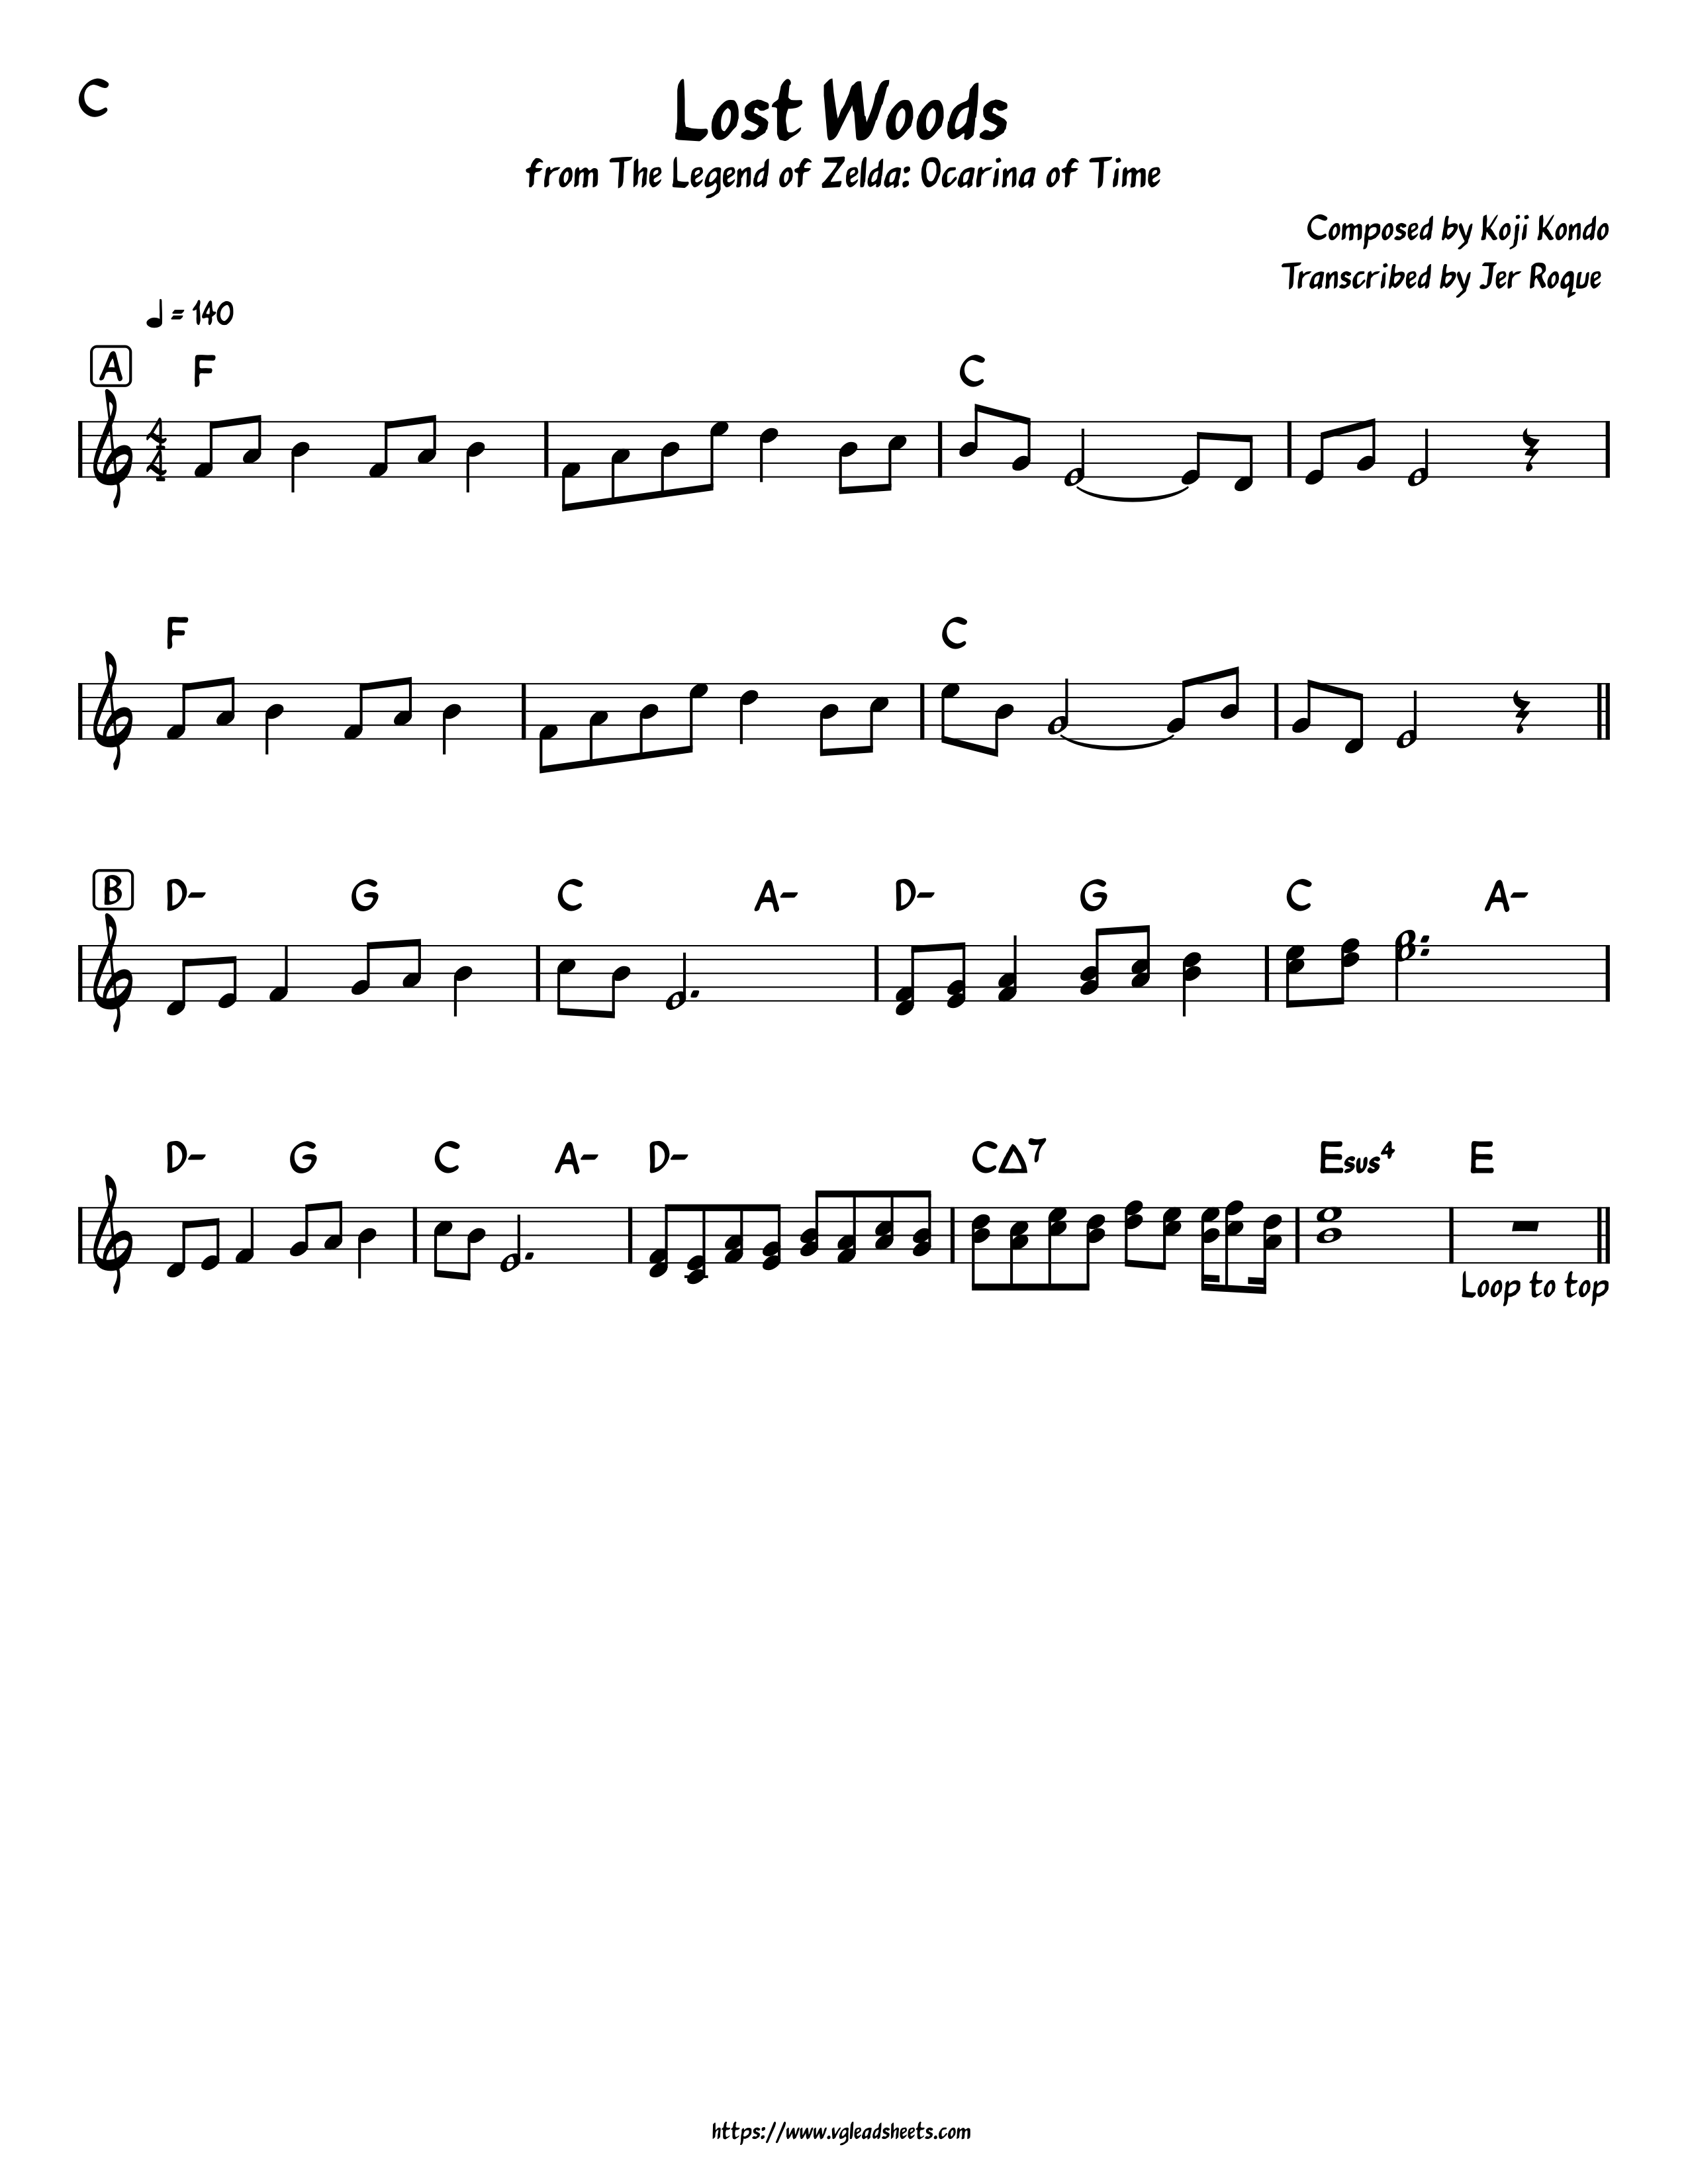 Free The Legend Of Zelda Ocarina Of Time - Suns Song by Misc Computer Games  sheet music